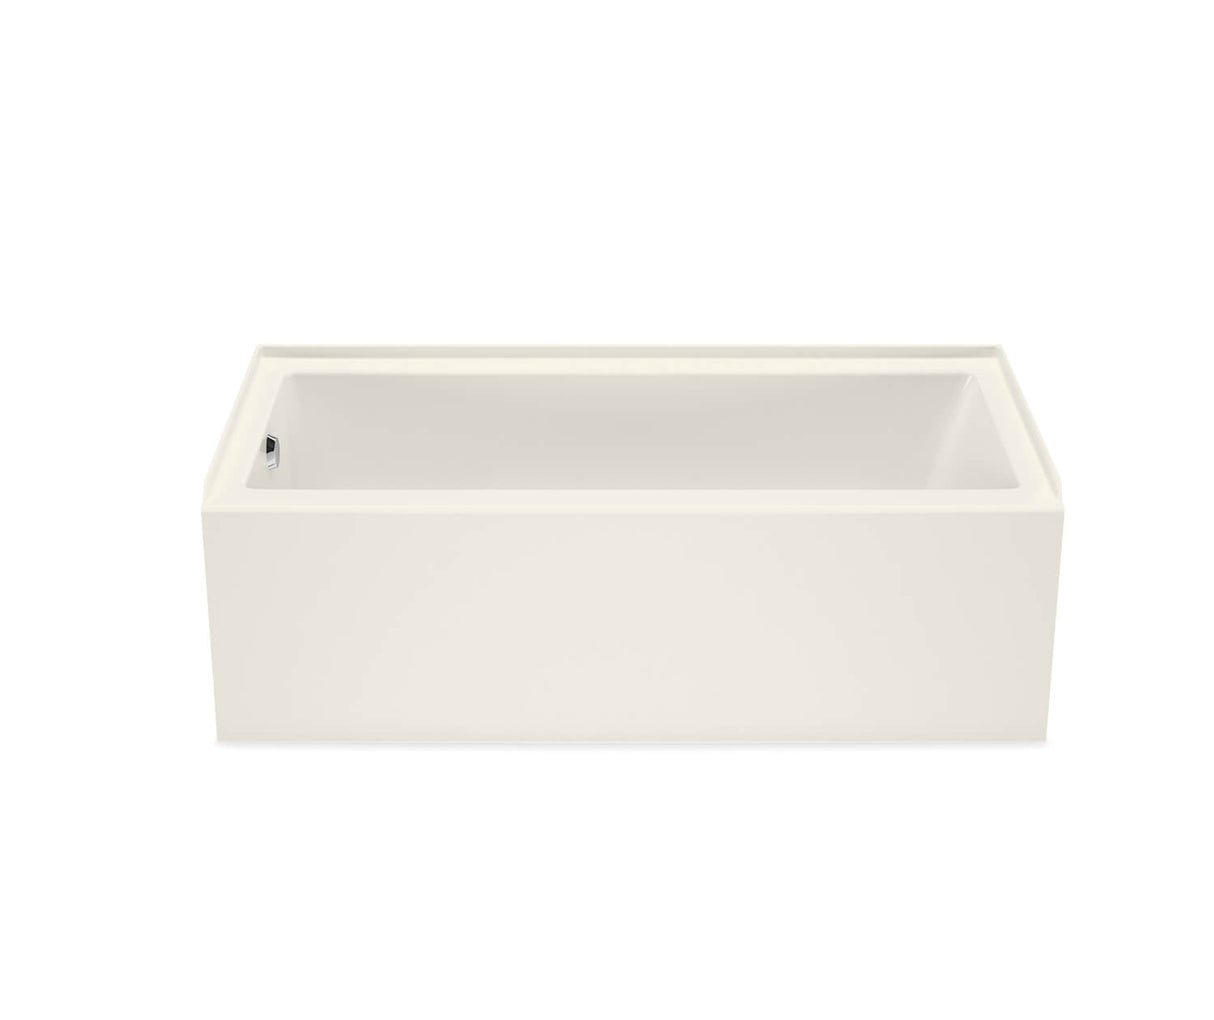 MAAX 106395-000-007-102 Bosca 6030 IFS AFR Acrylic Alcove Right-Hand Drain Bathtub in Biscuit